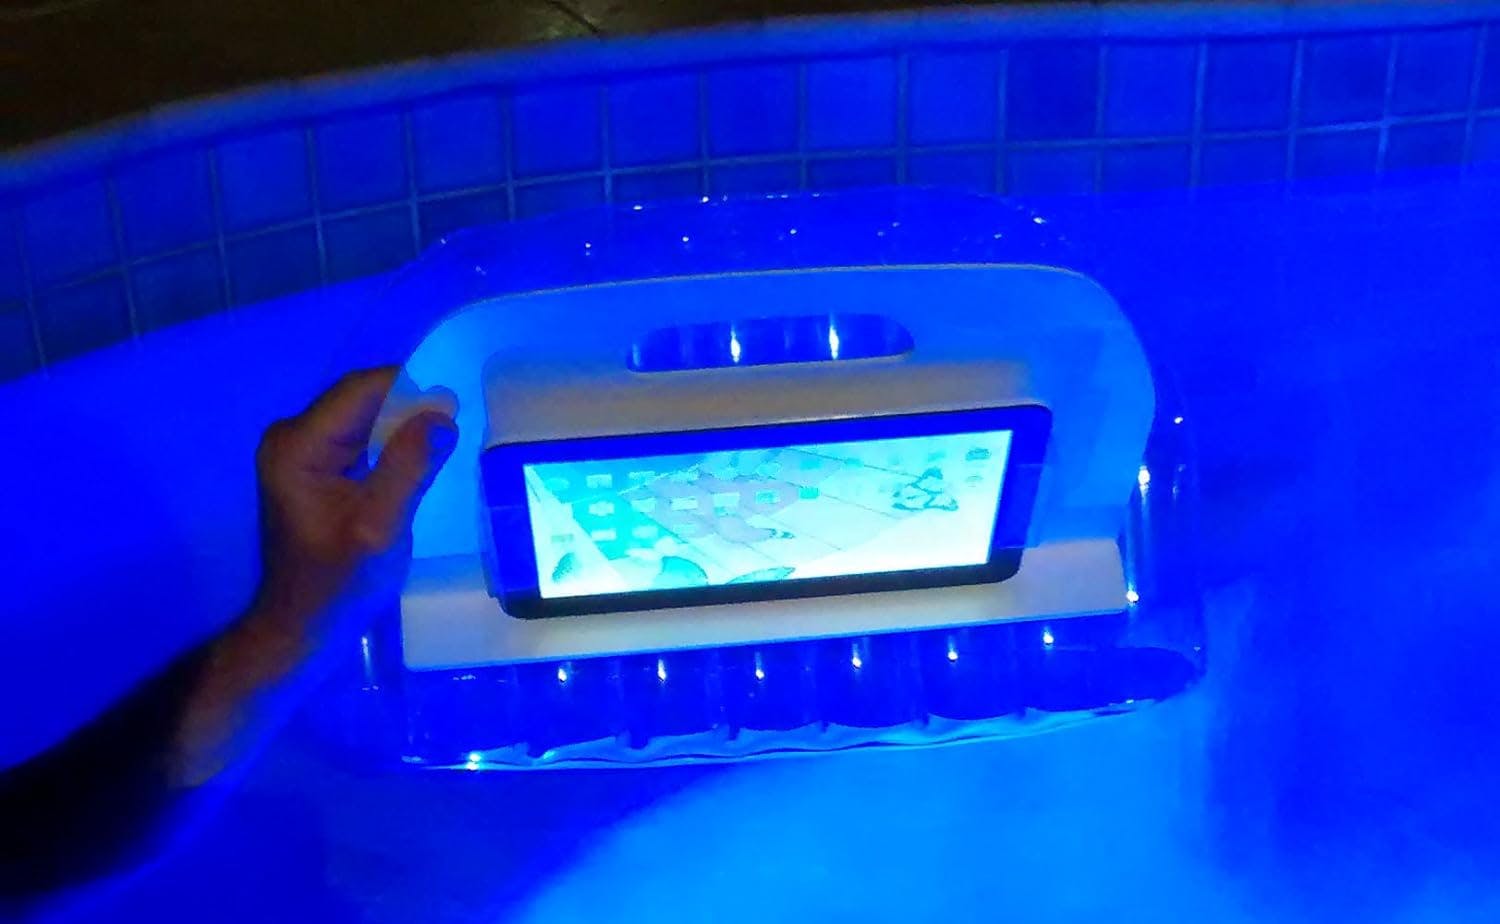 Buoyant Clear Acrylic Floating Book/Tablet Caddy for Bath and Pool